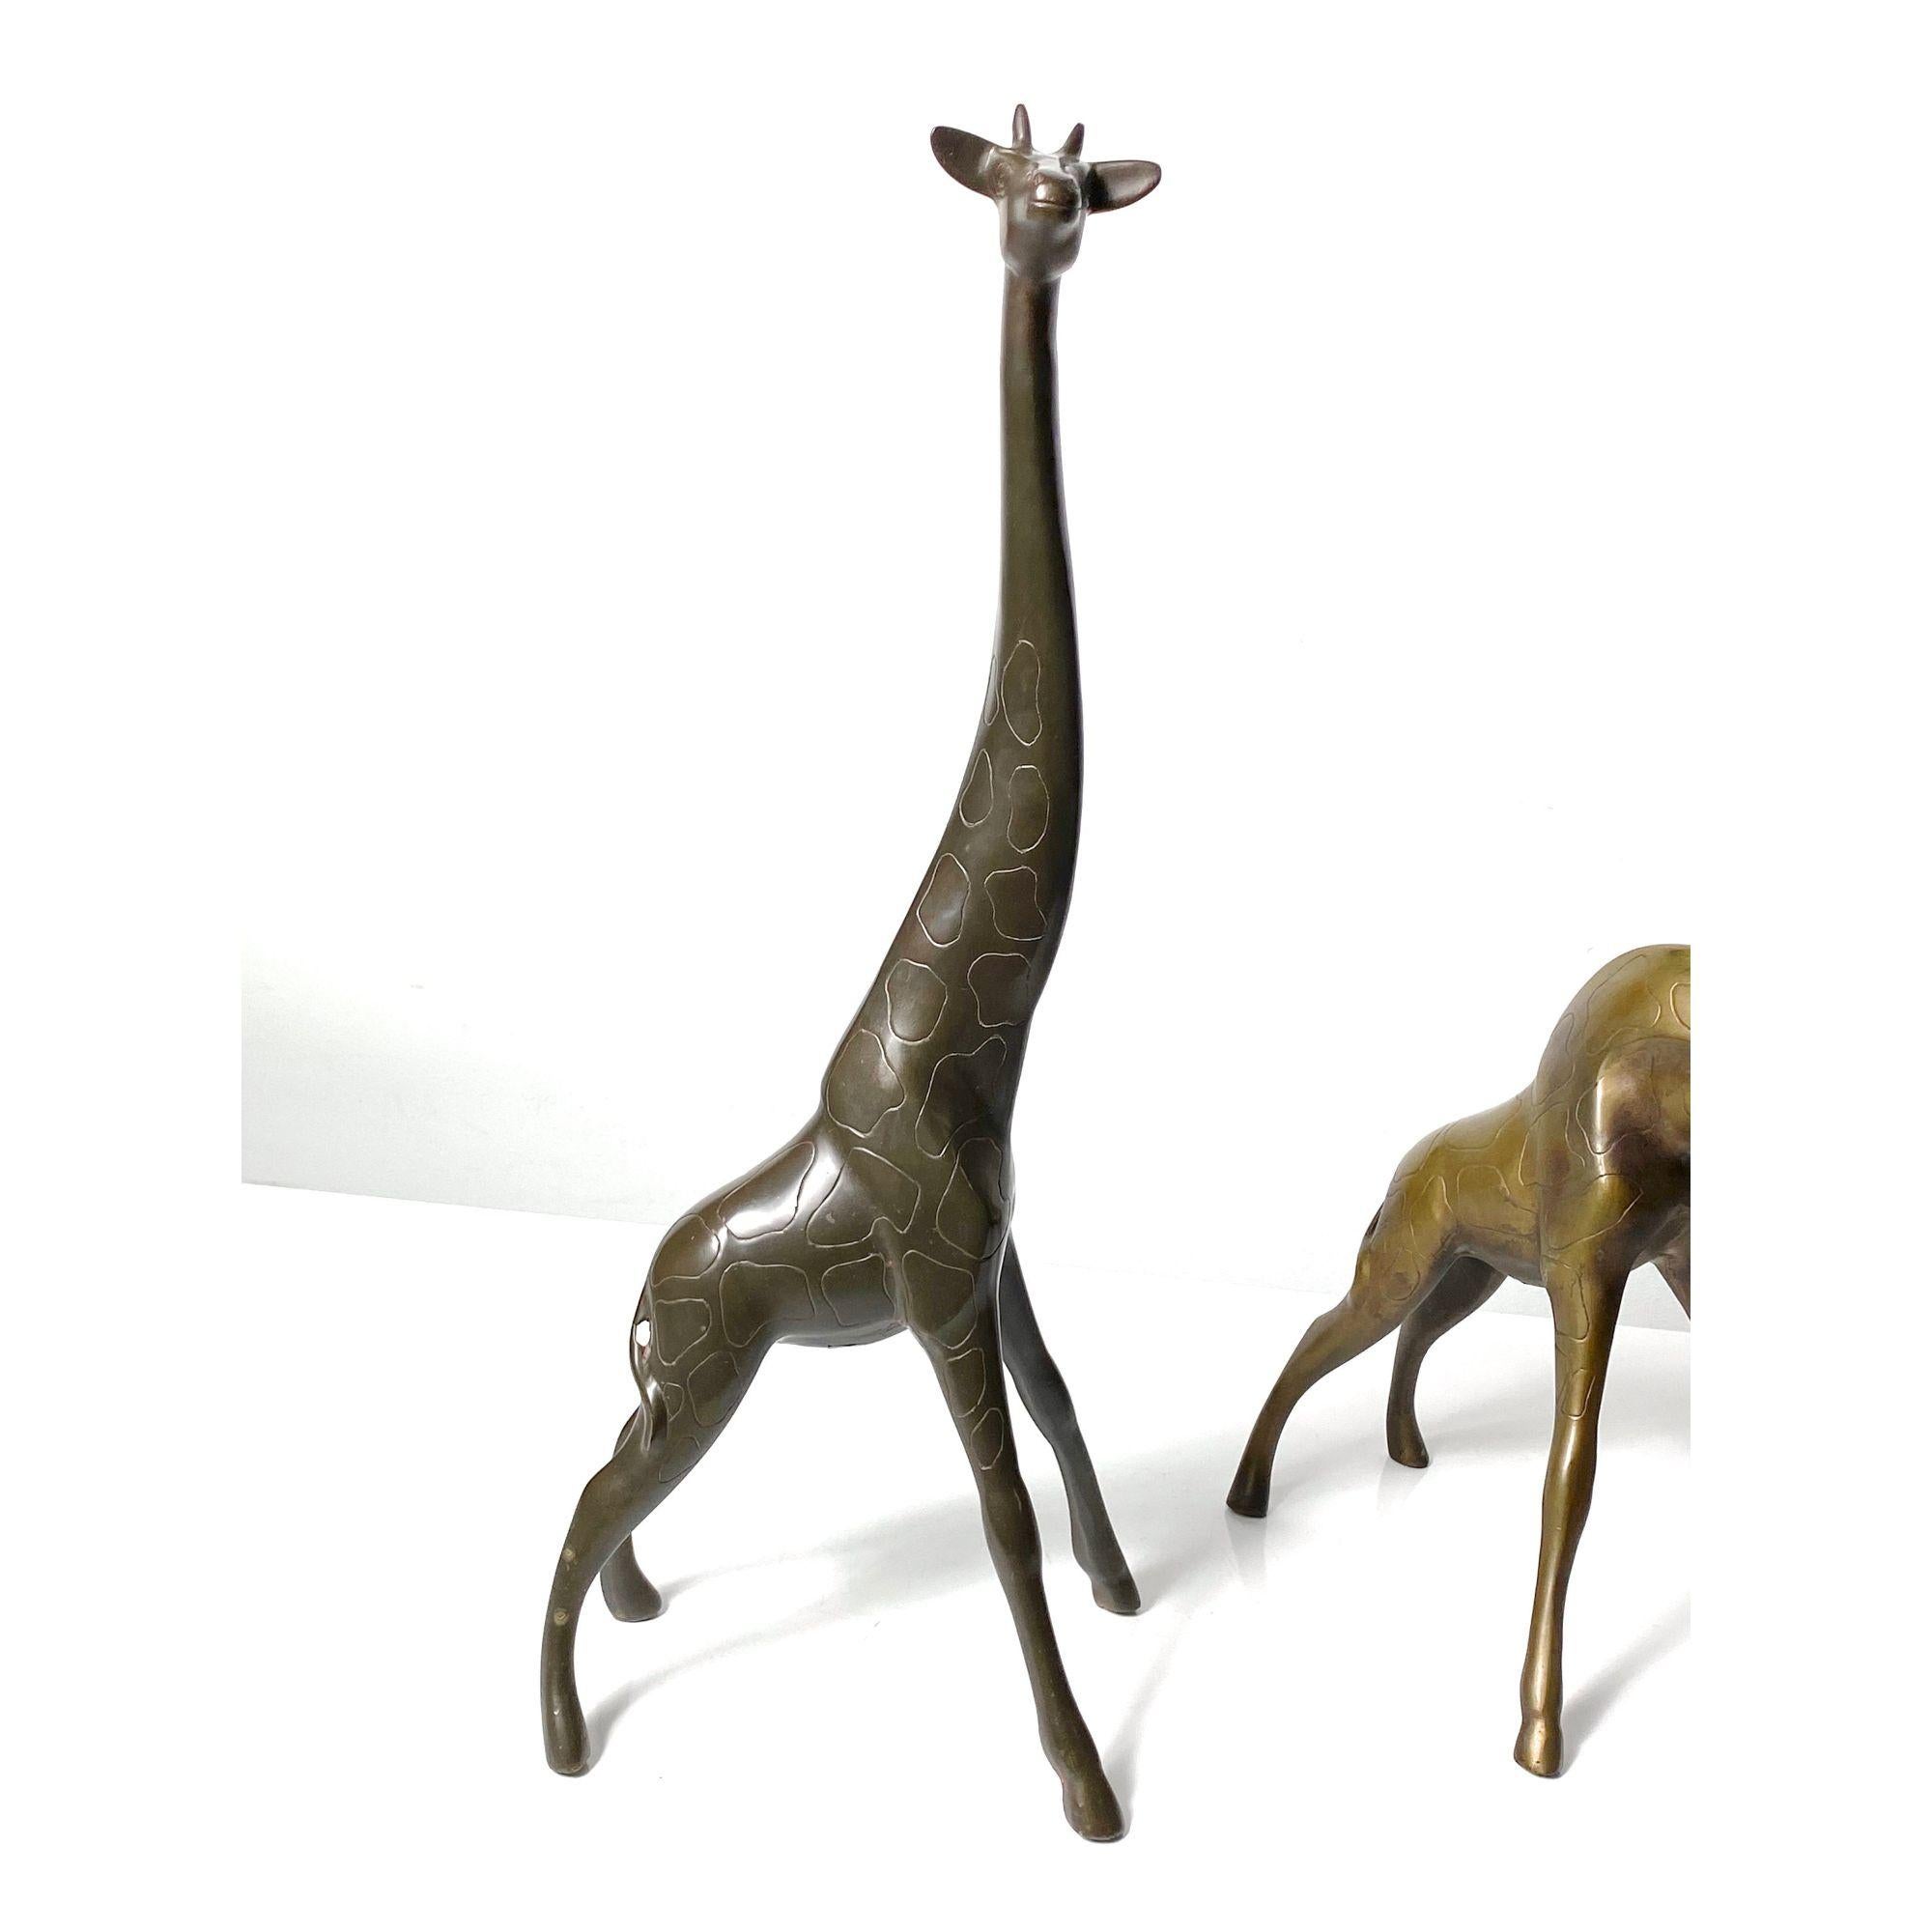 Pair of Vintage Giraffe Sculptures in Bronze and Brass, circa 1970s In Good Condition For Sale In Troy, MI